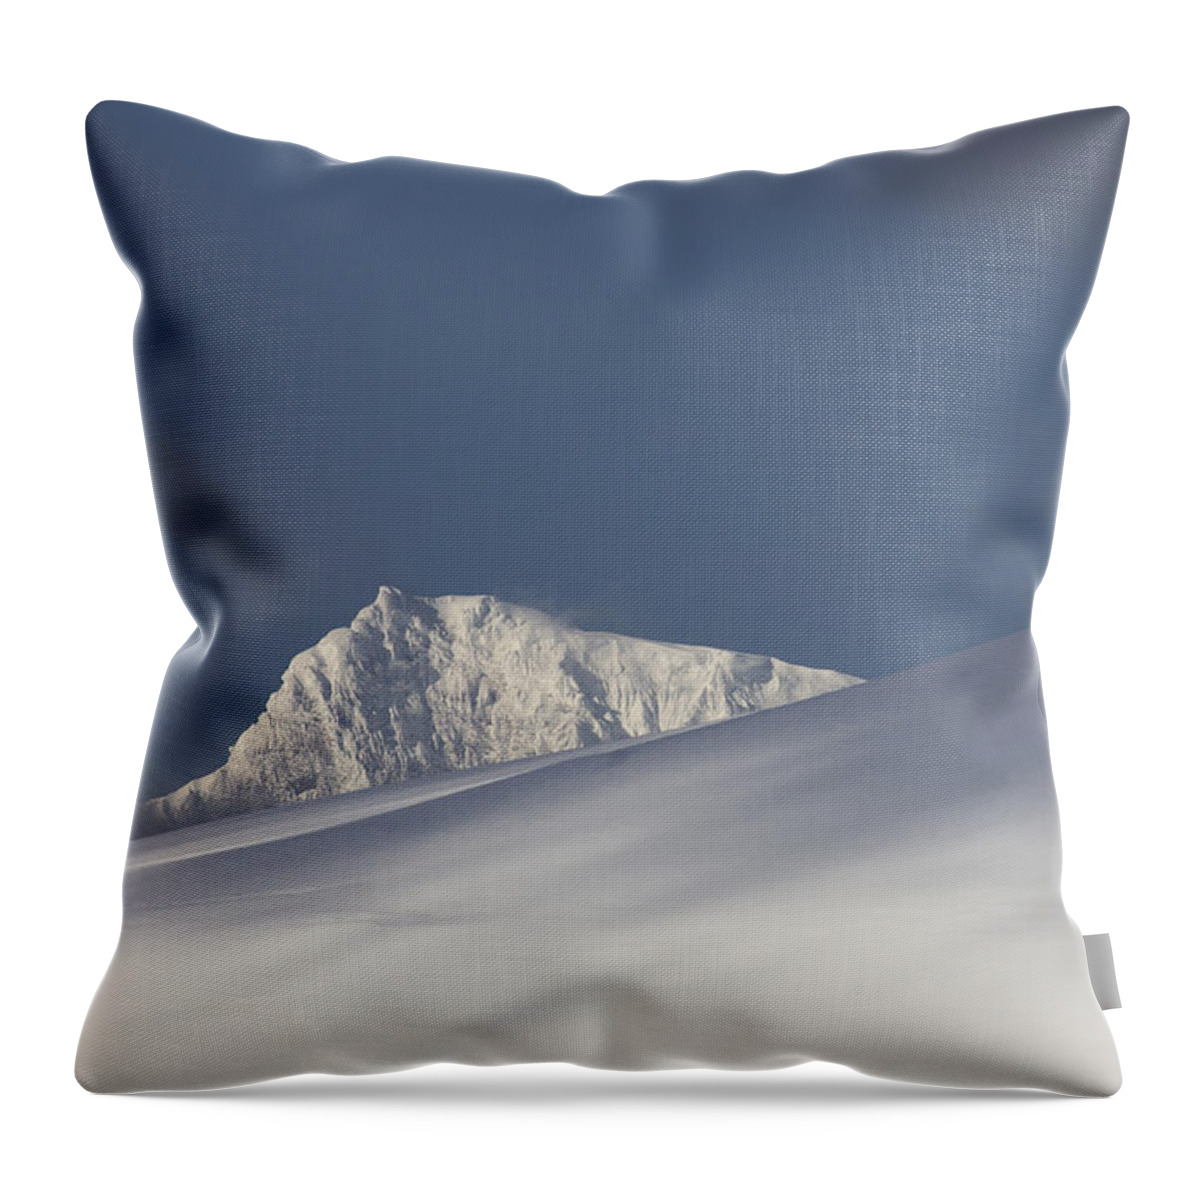 Feb0514 Throw Pillow featuring the photograph Glacier Ice On Melchior Islands by Matthias Breiter